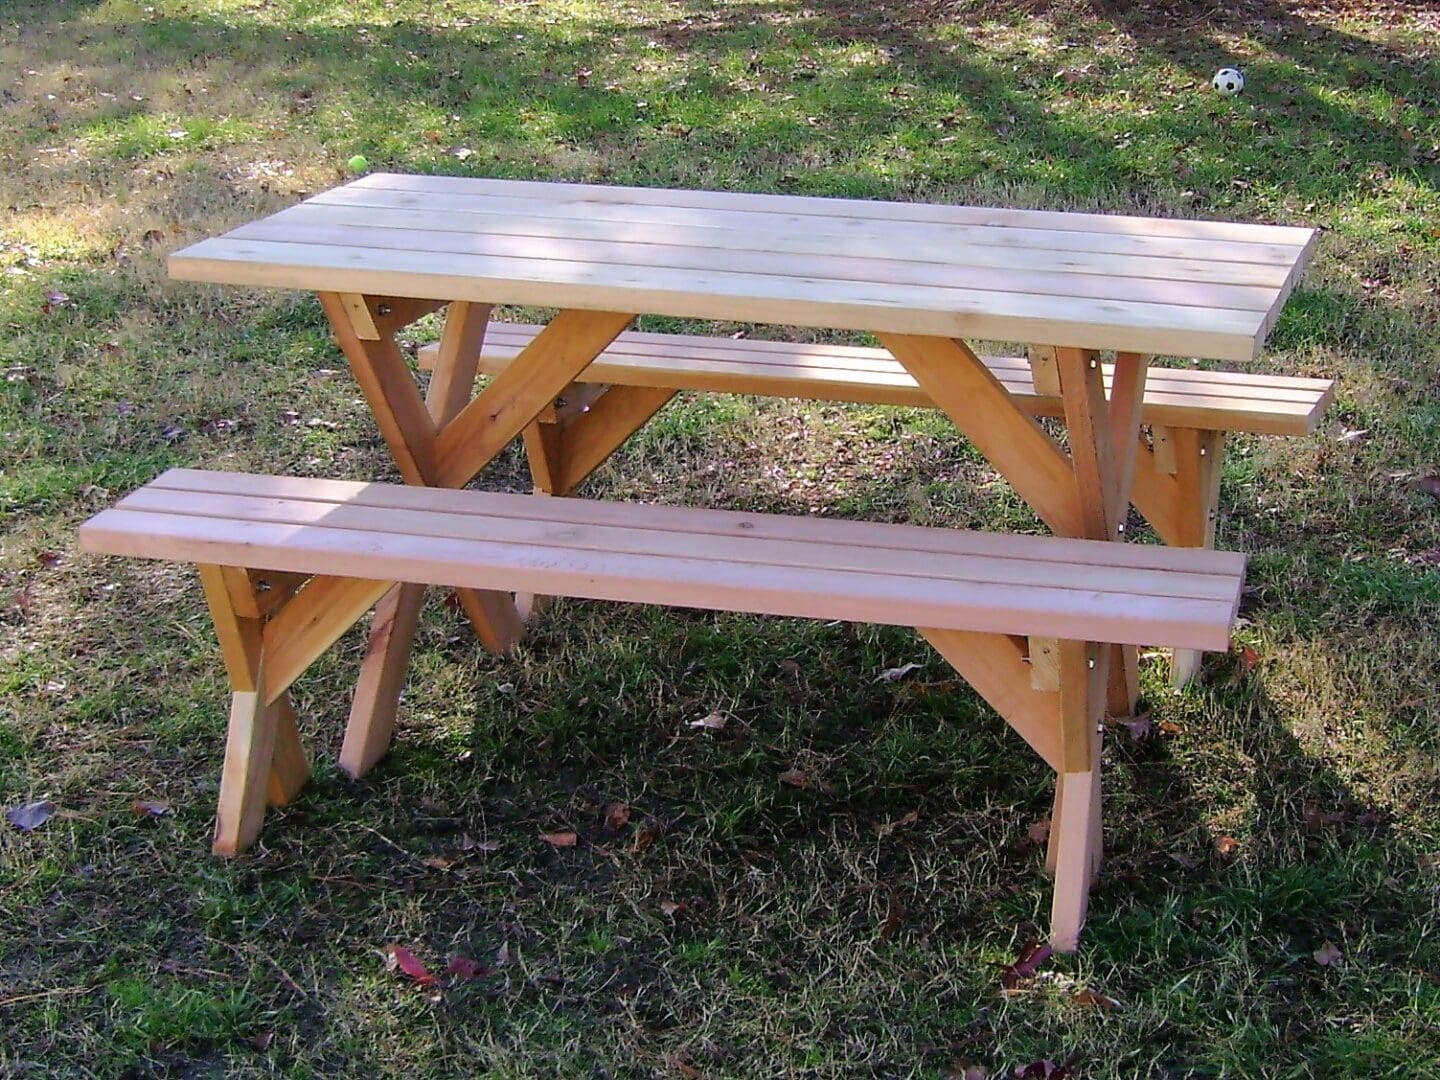 A wooden picnic table and bench in the grass.